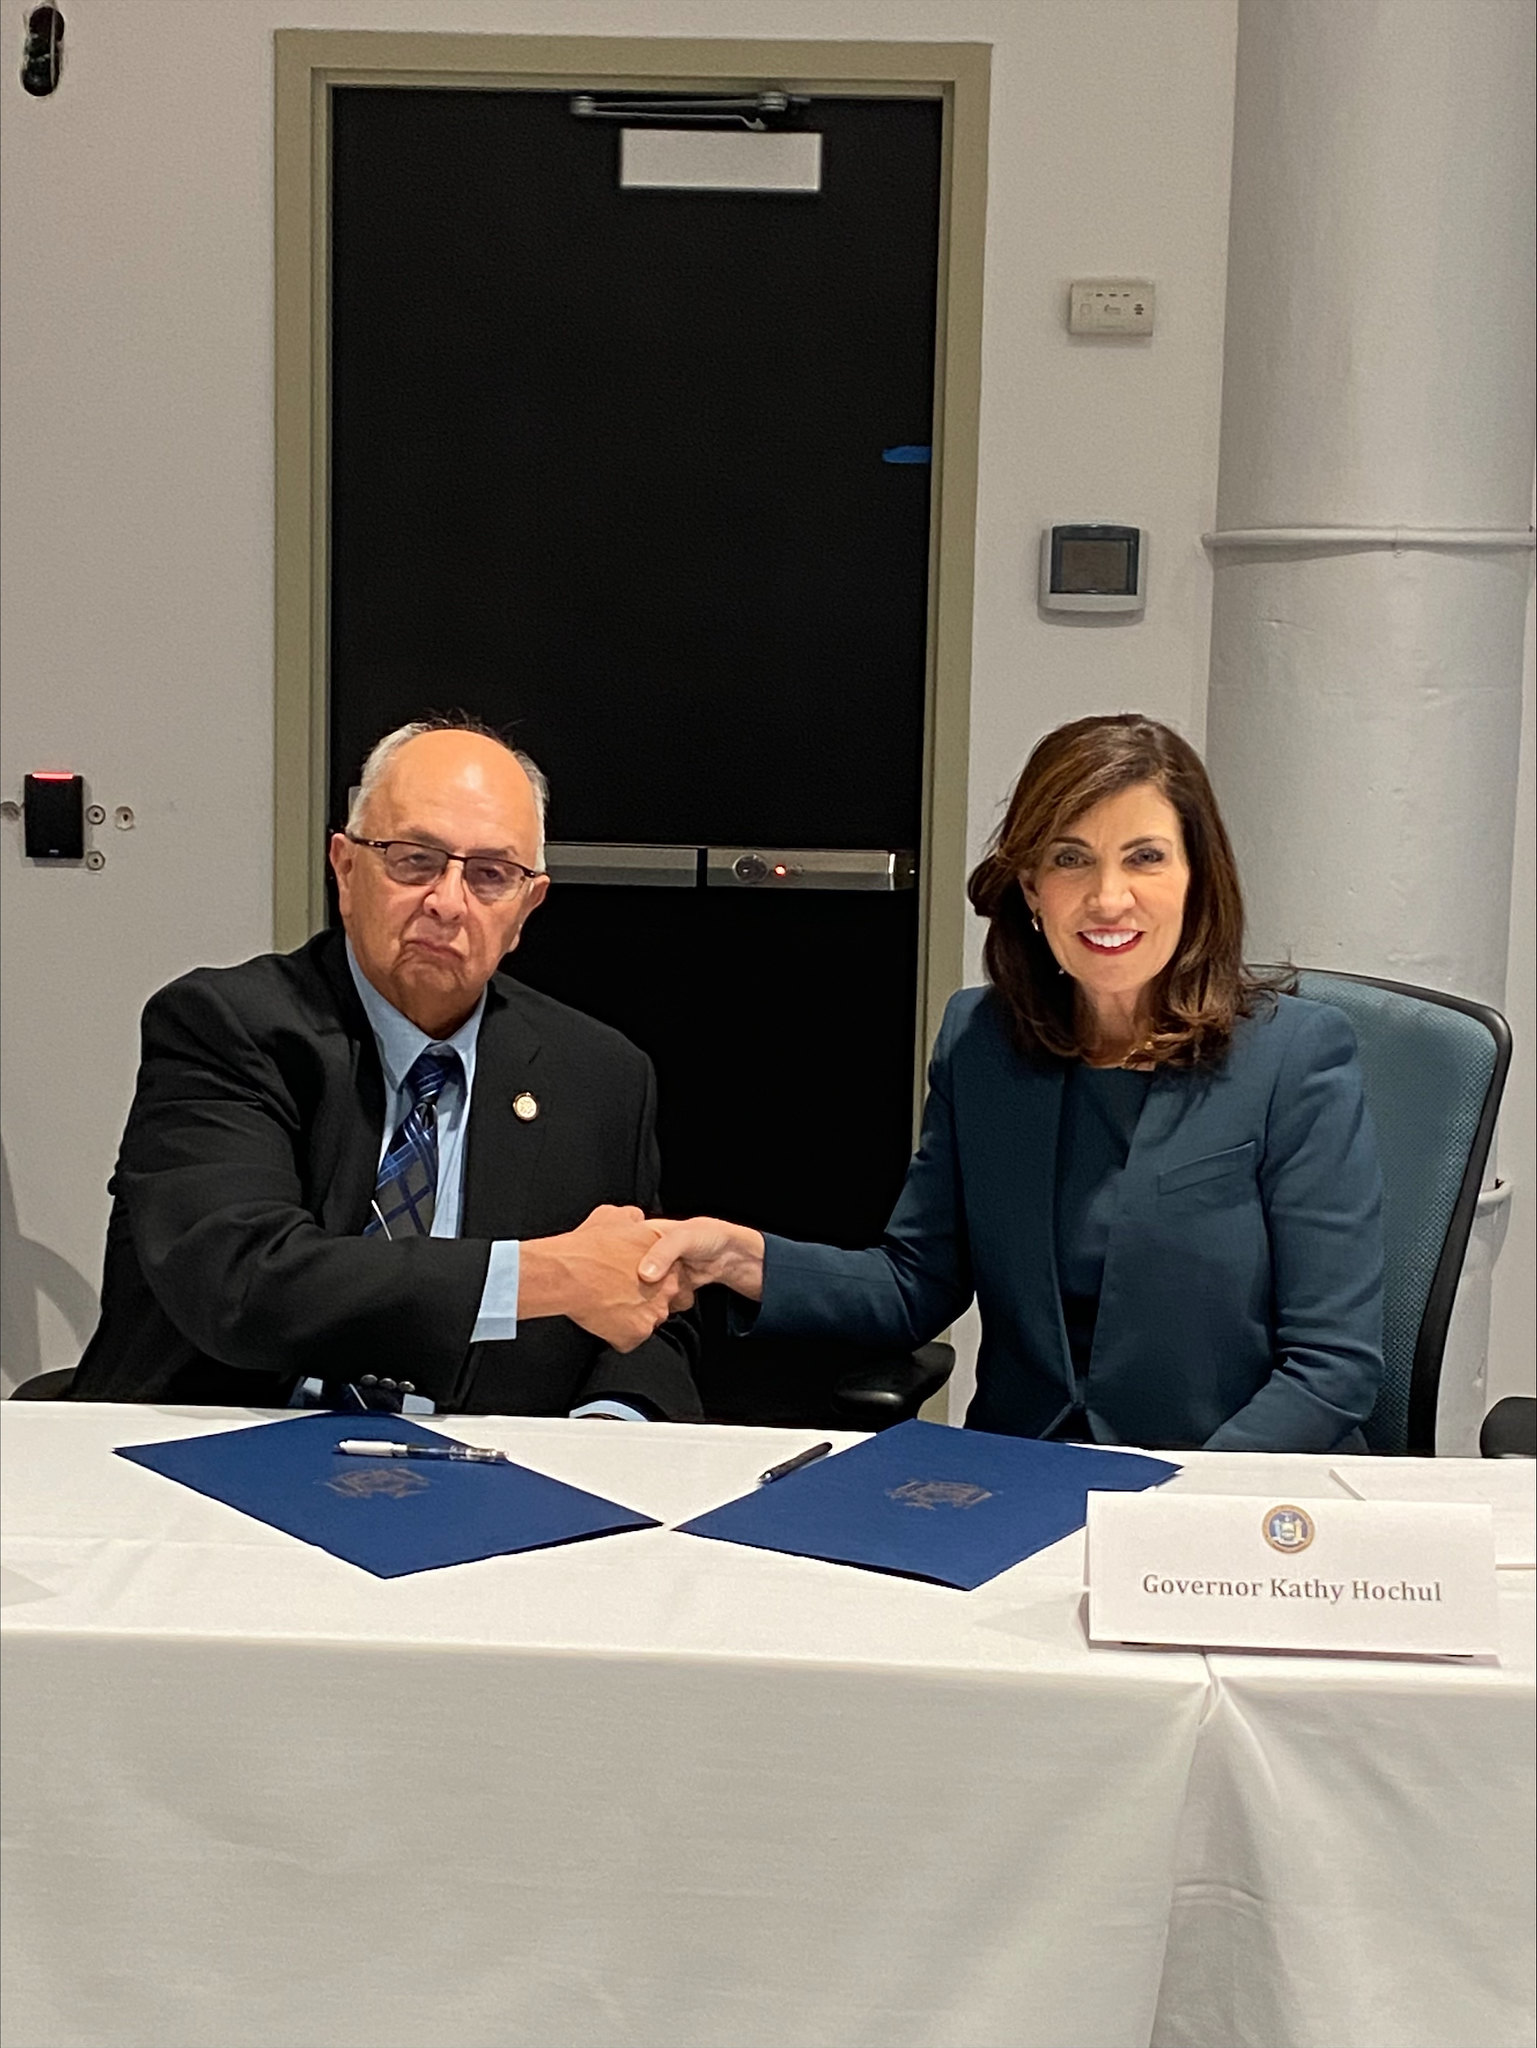 Gov. Kathy Hochul and Seneca Nation of Indians President Rickey L. Armstrong Sr. announce a short-term extension of the current gaming compact between New York state and the Seneca Nation of Indians while discussions continue on a new 20-year gaming compact. (Image courtesy of the Office of Gov. Kathy Hochul)